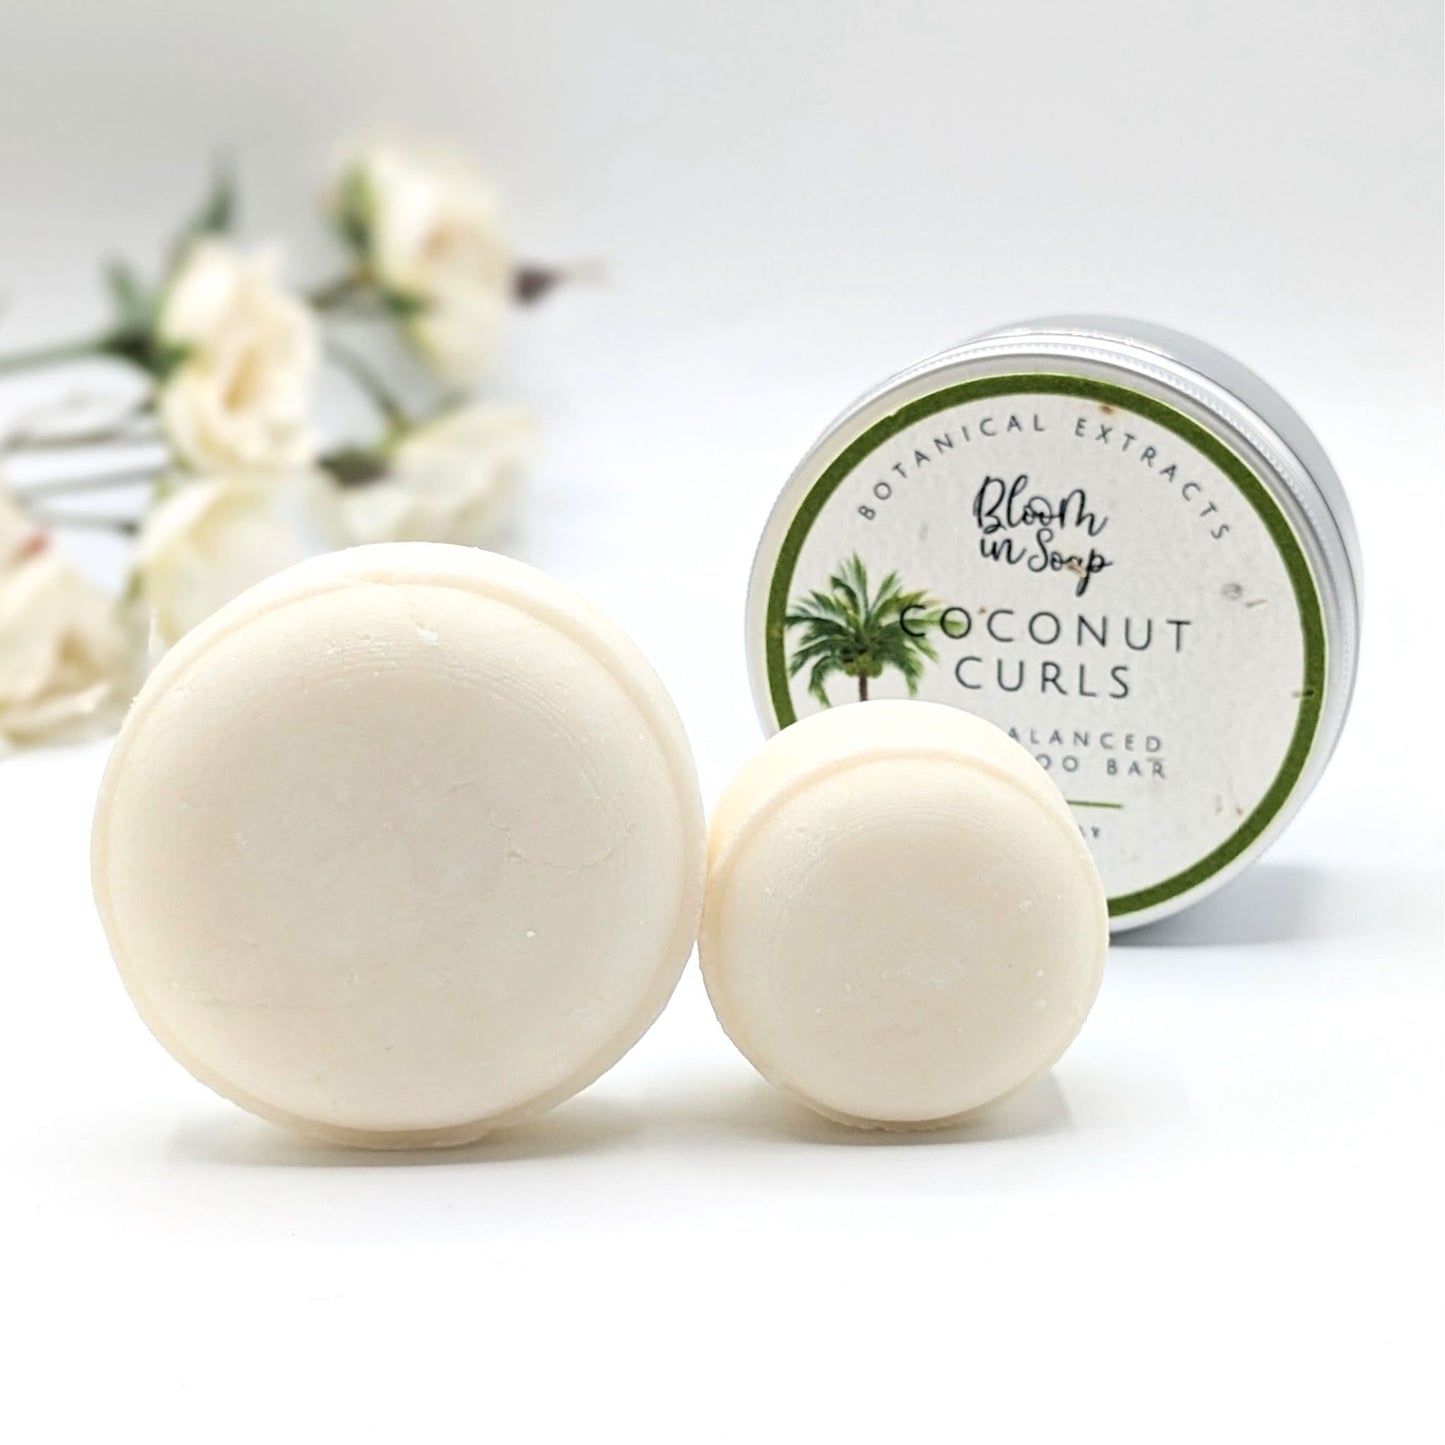 Coconut Curls shampoo bar in trial size and full size